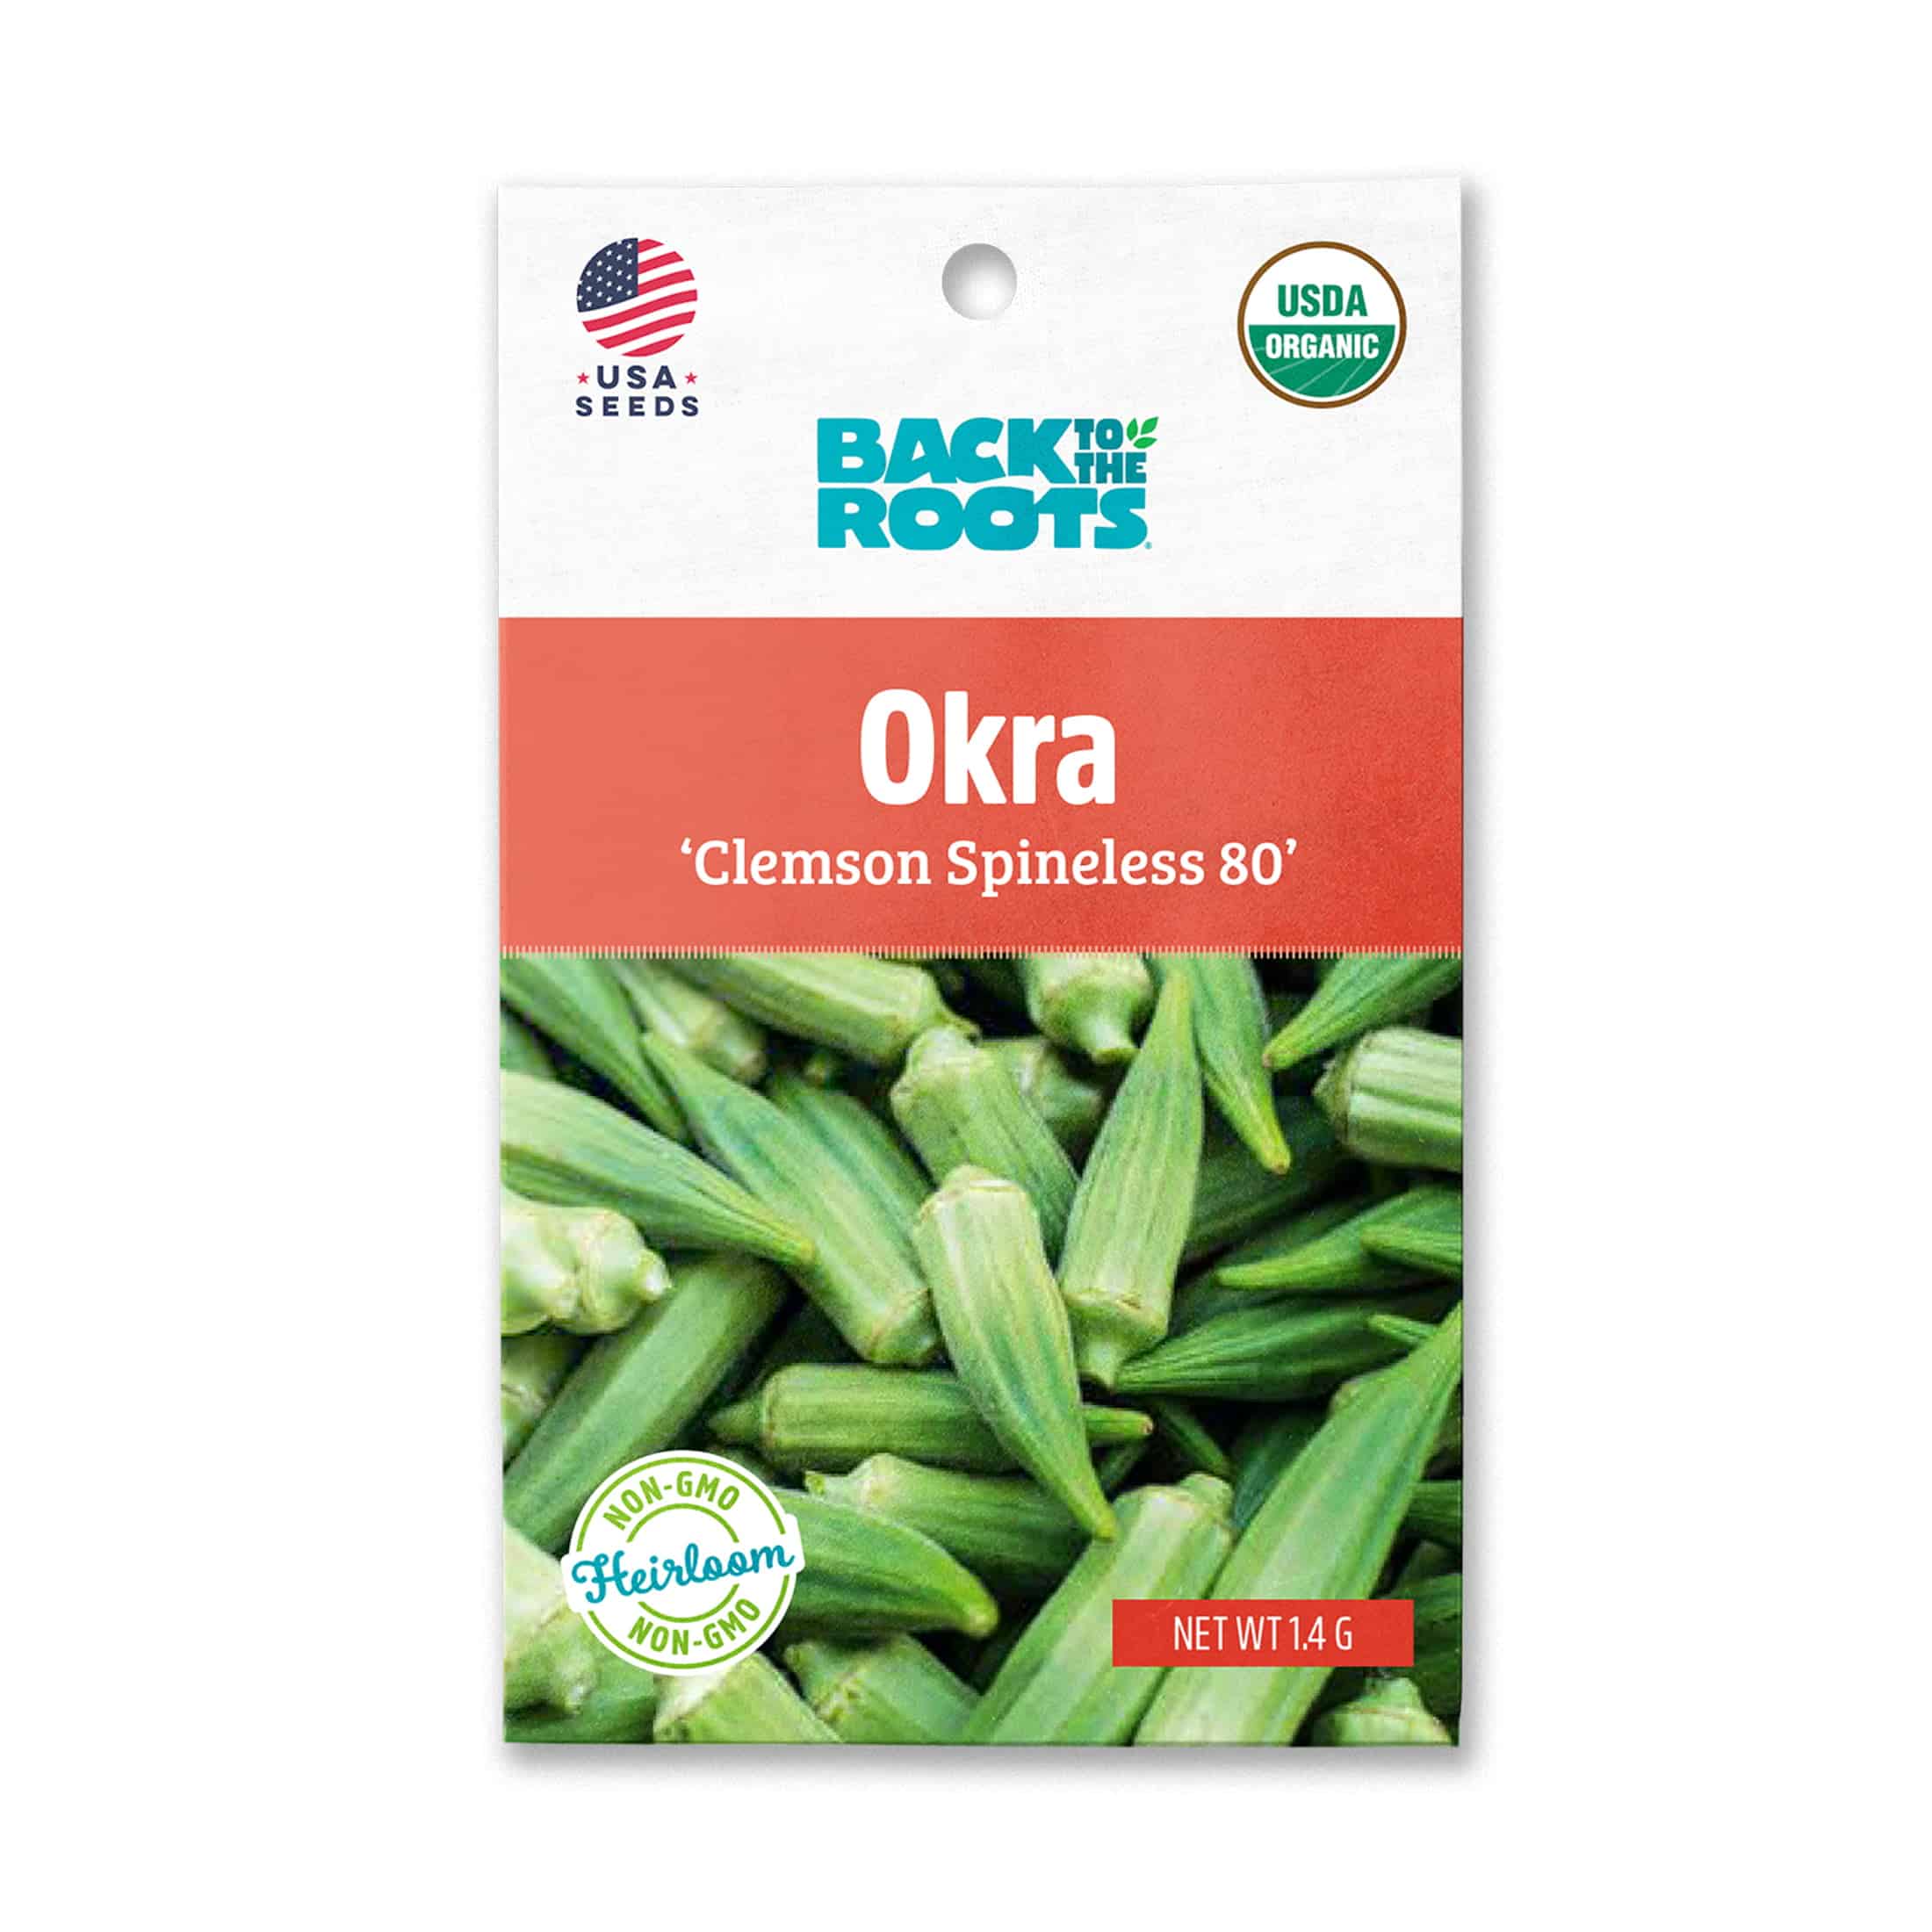 Back To The Roots Okra 'Clemson Spineless 80' Seeds